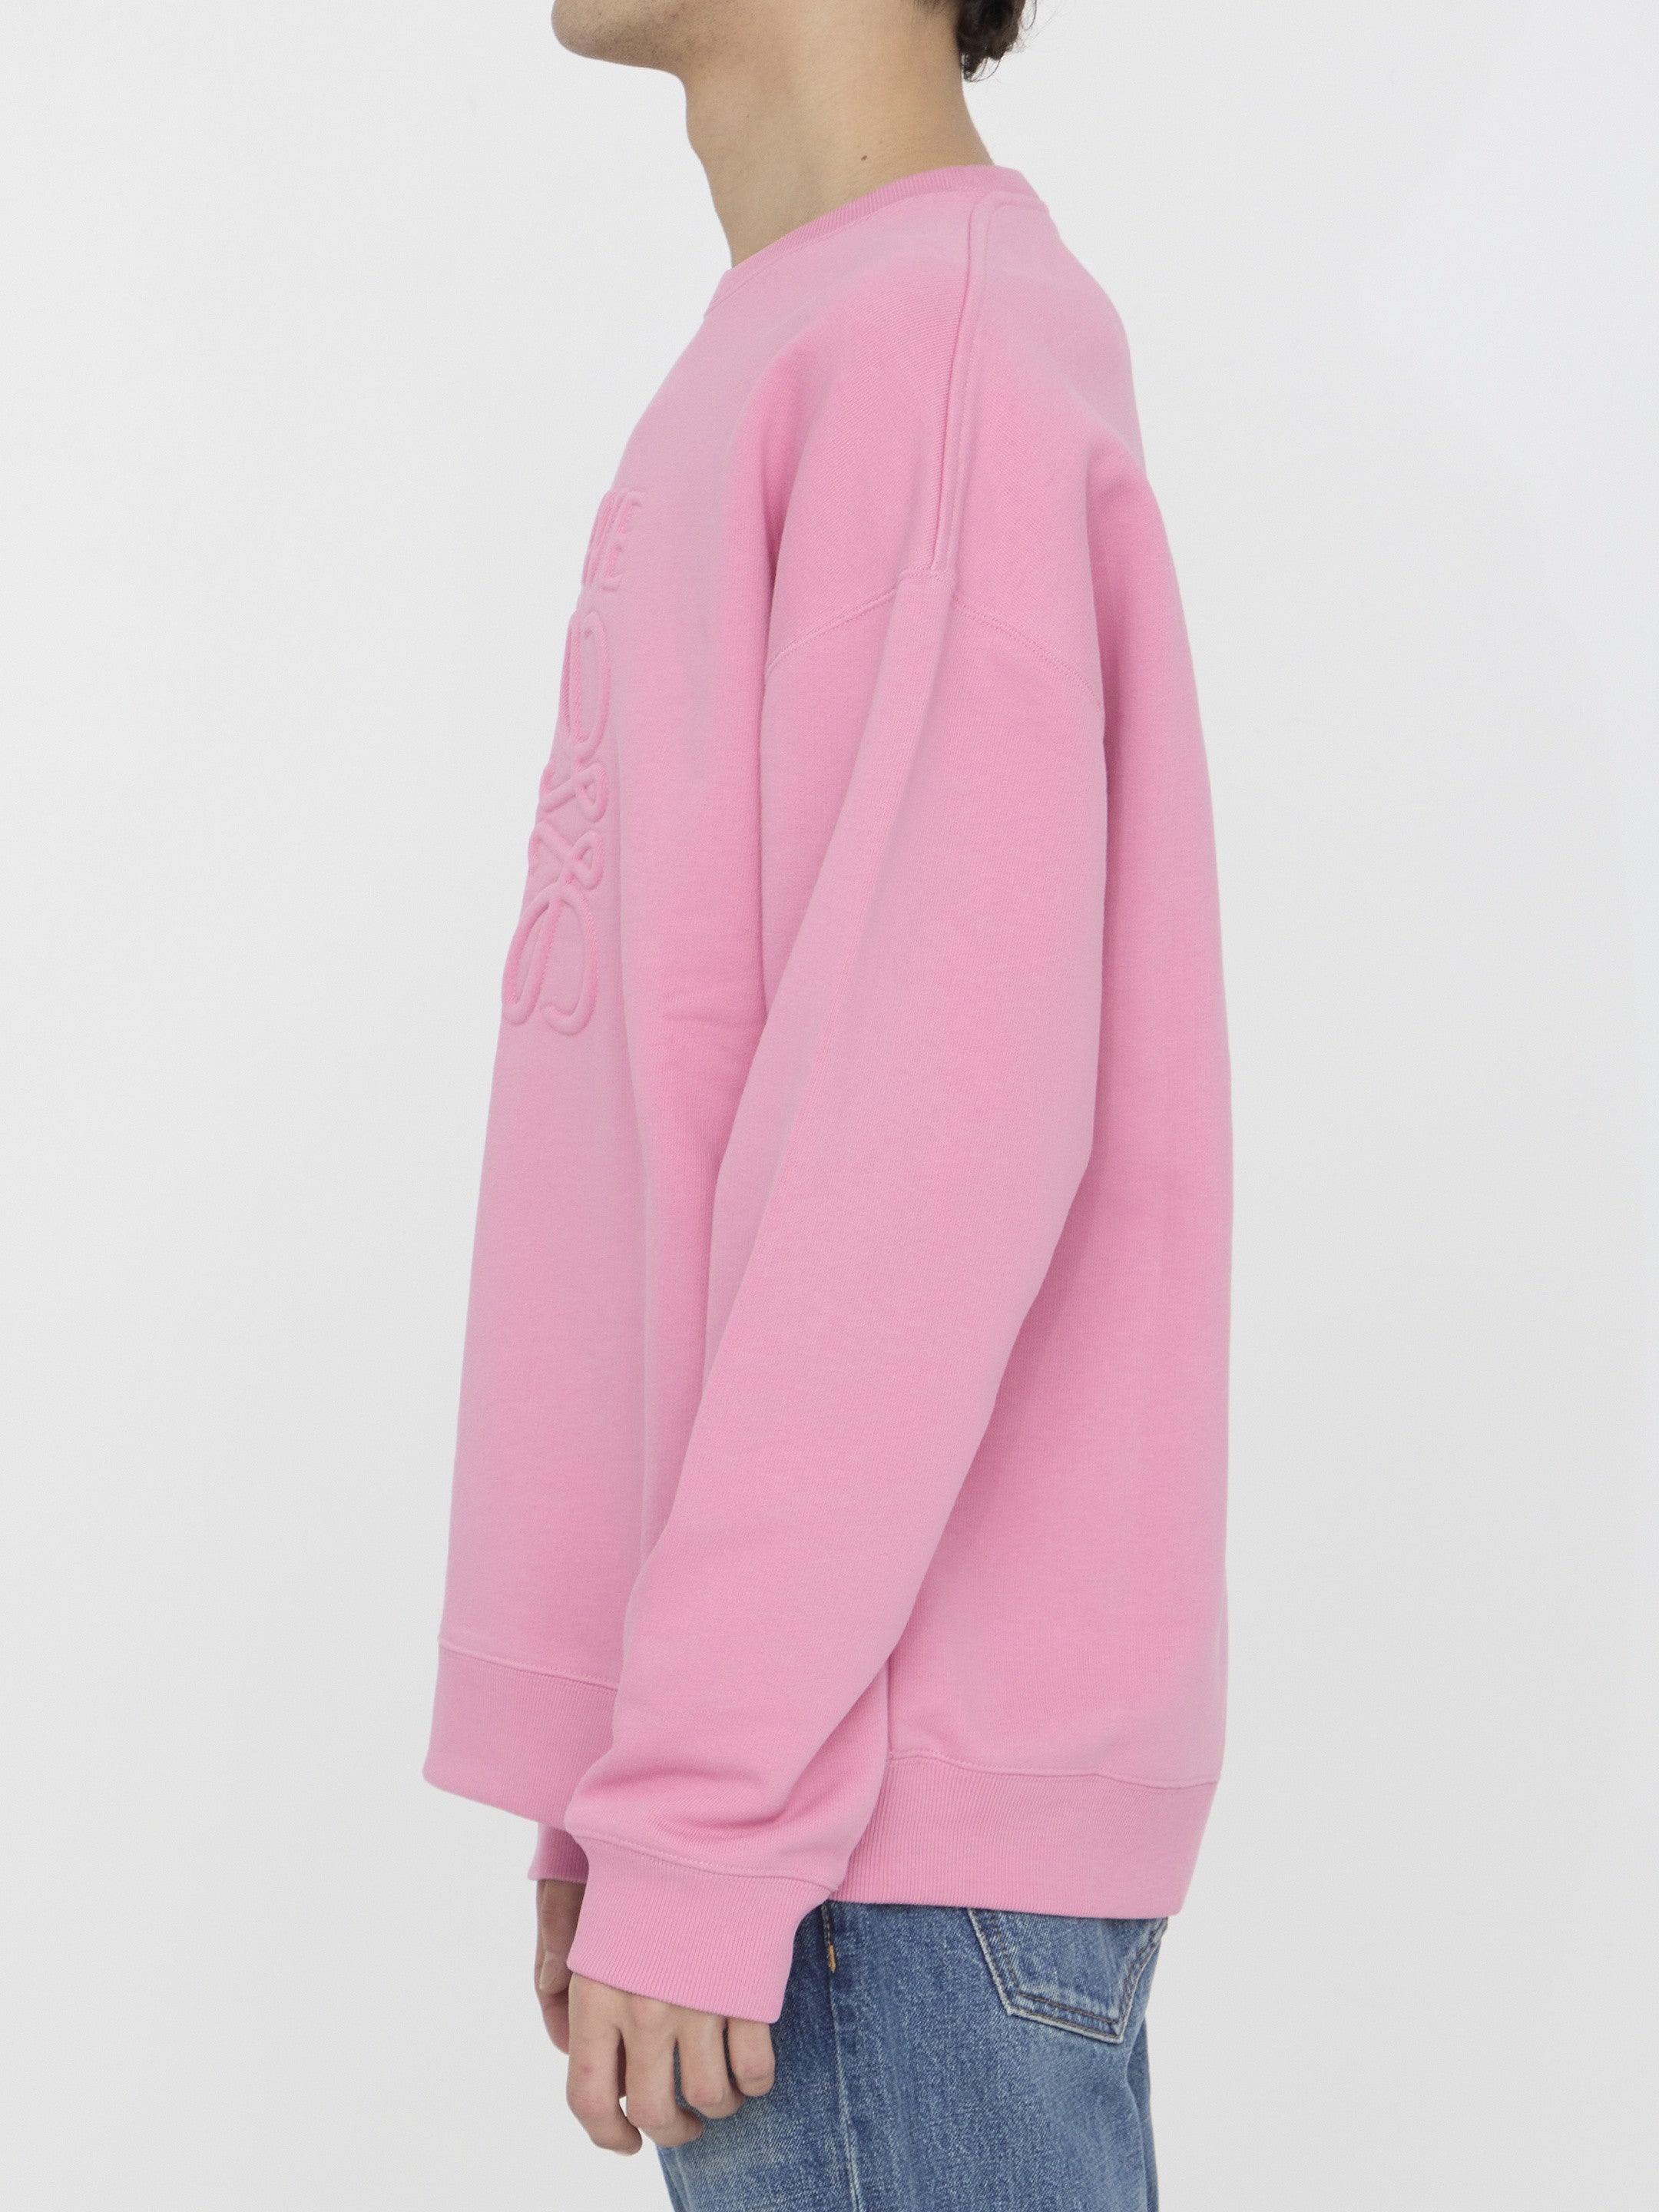 LOEWE-OUTLET-SALE-Cotton-sweatshirt-Strick-S-PINK-ARCHIVE-COLLECTION-3.jpg